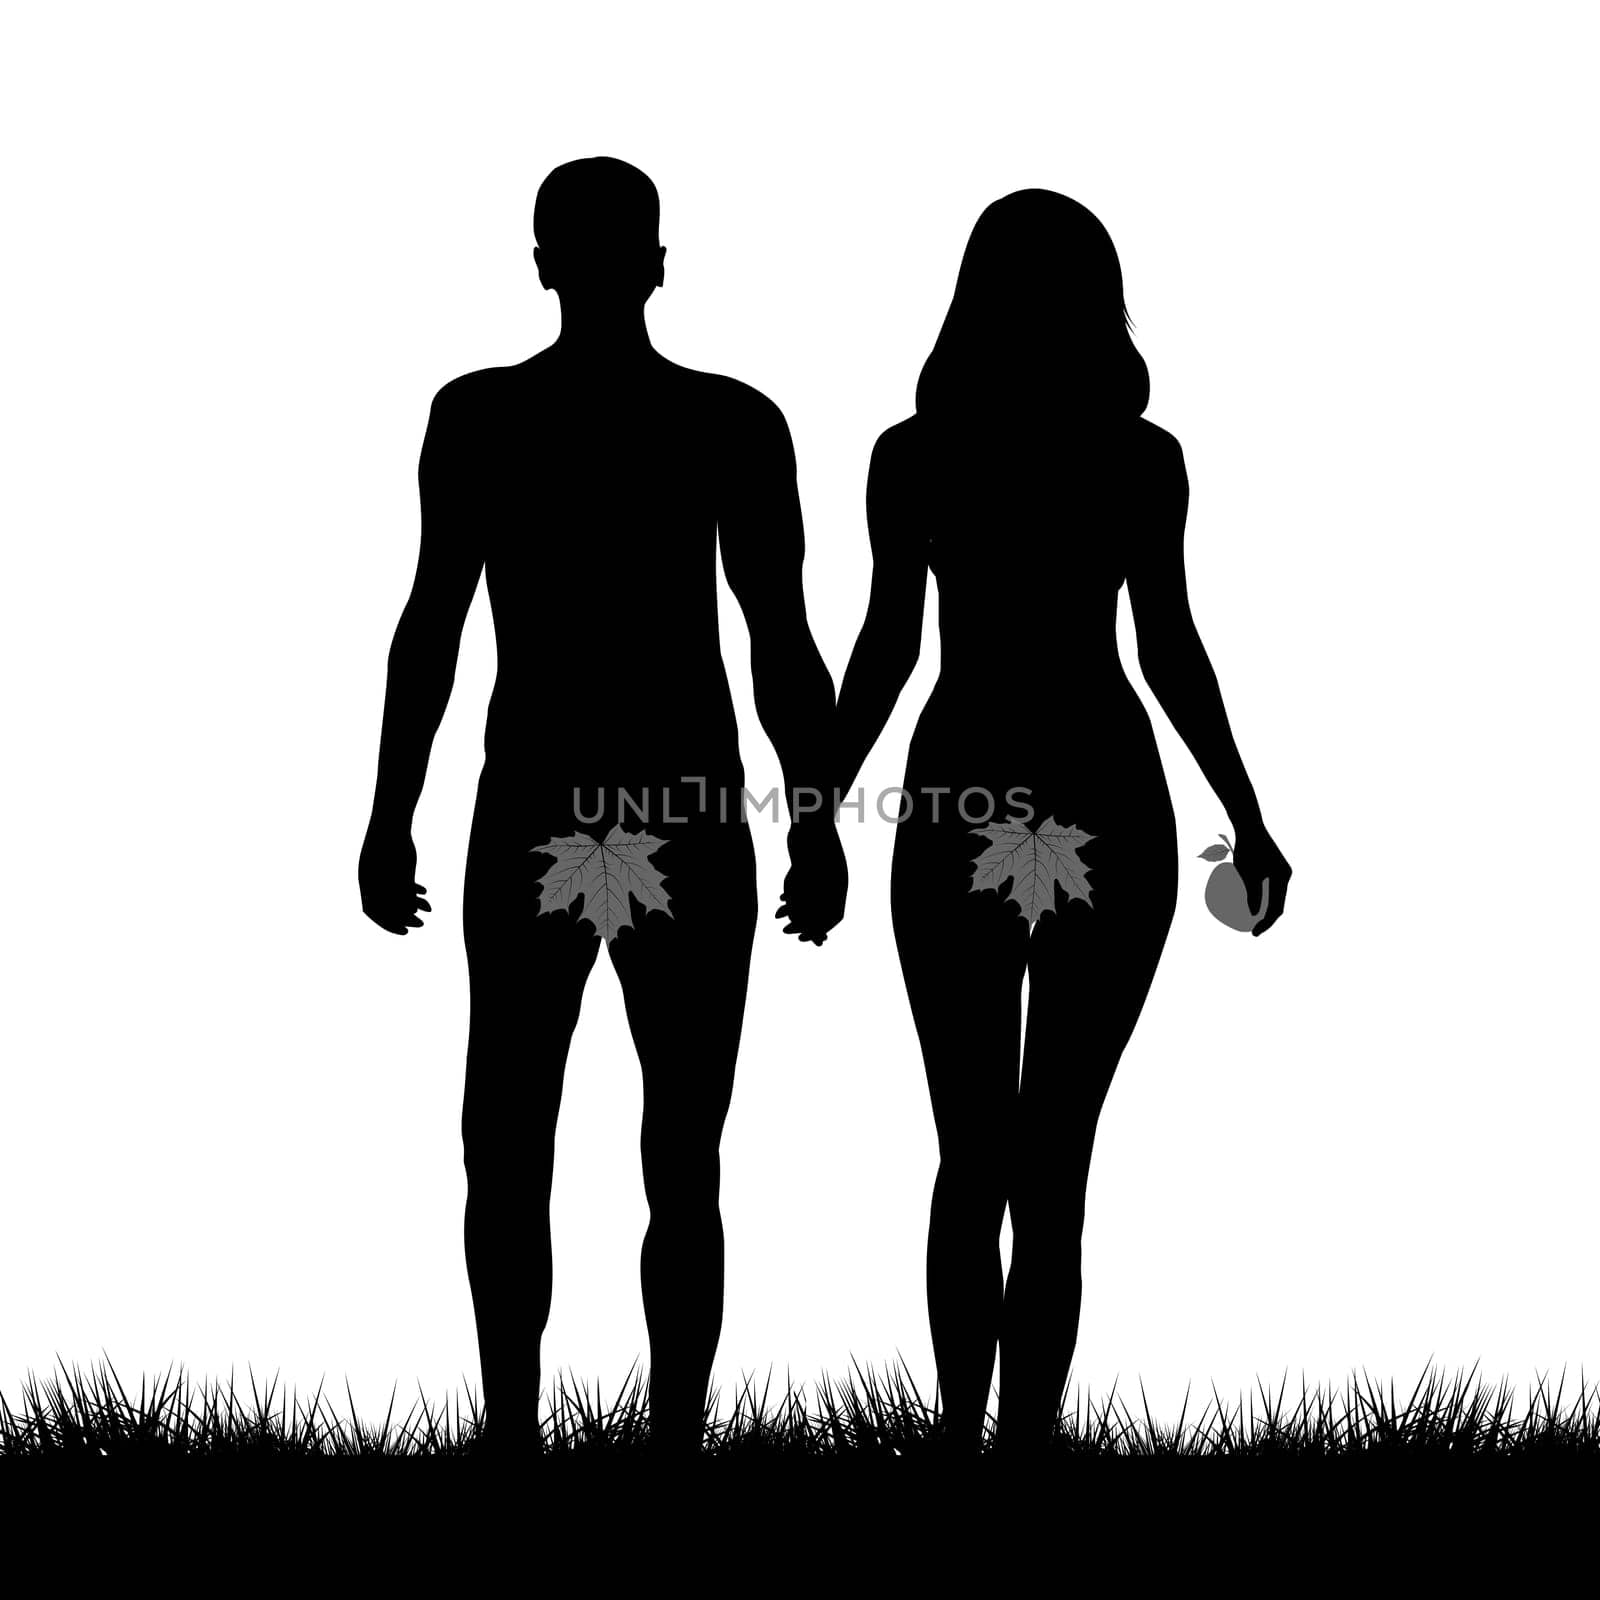 Adam and Eve silhouettes by hibrida13